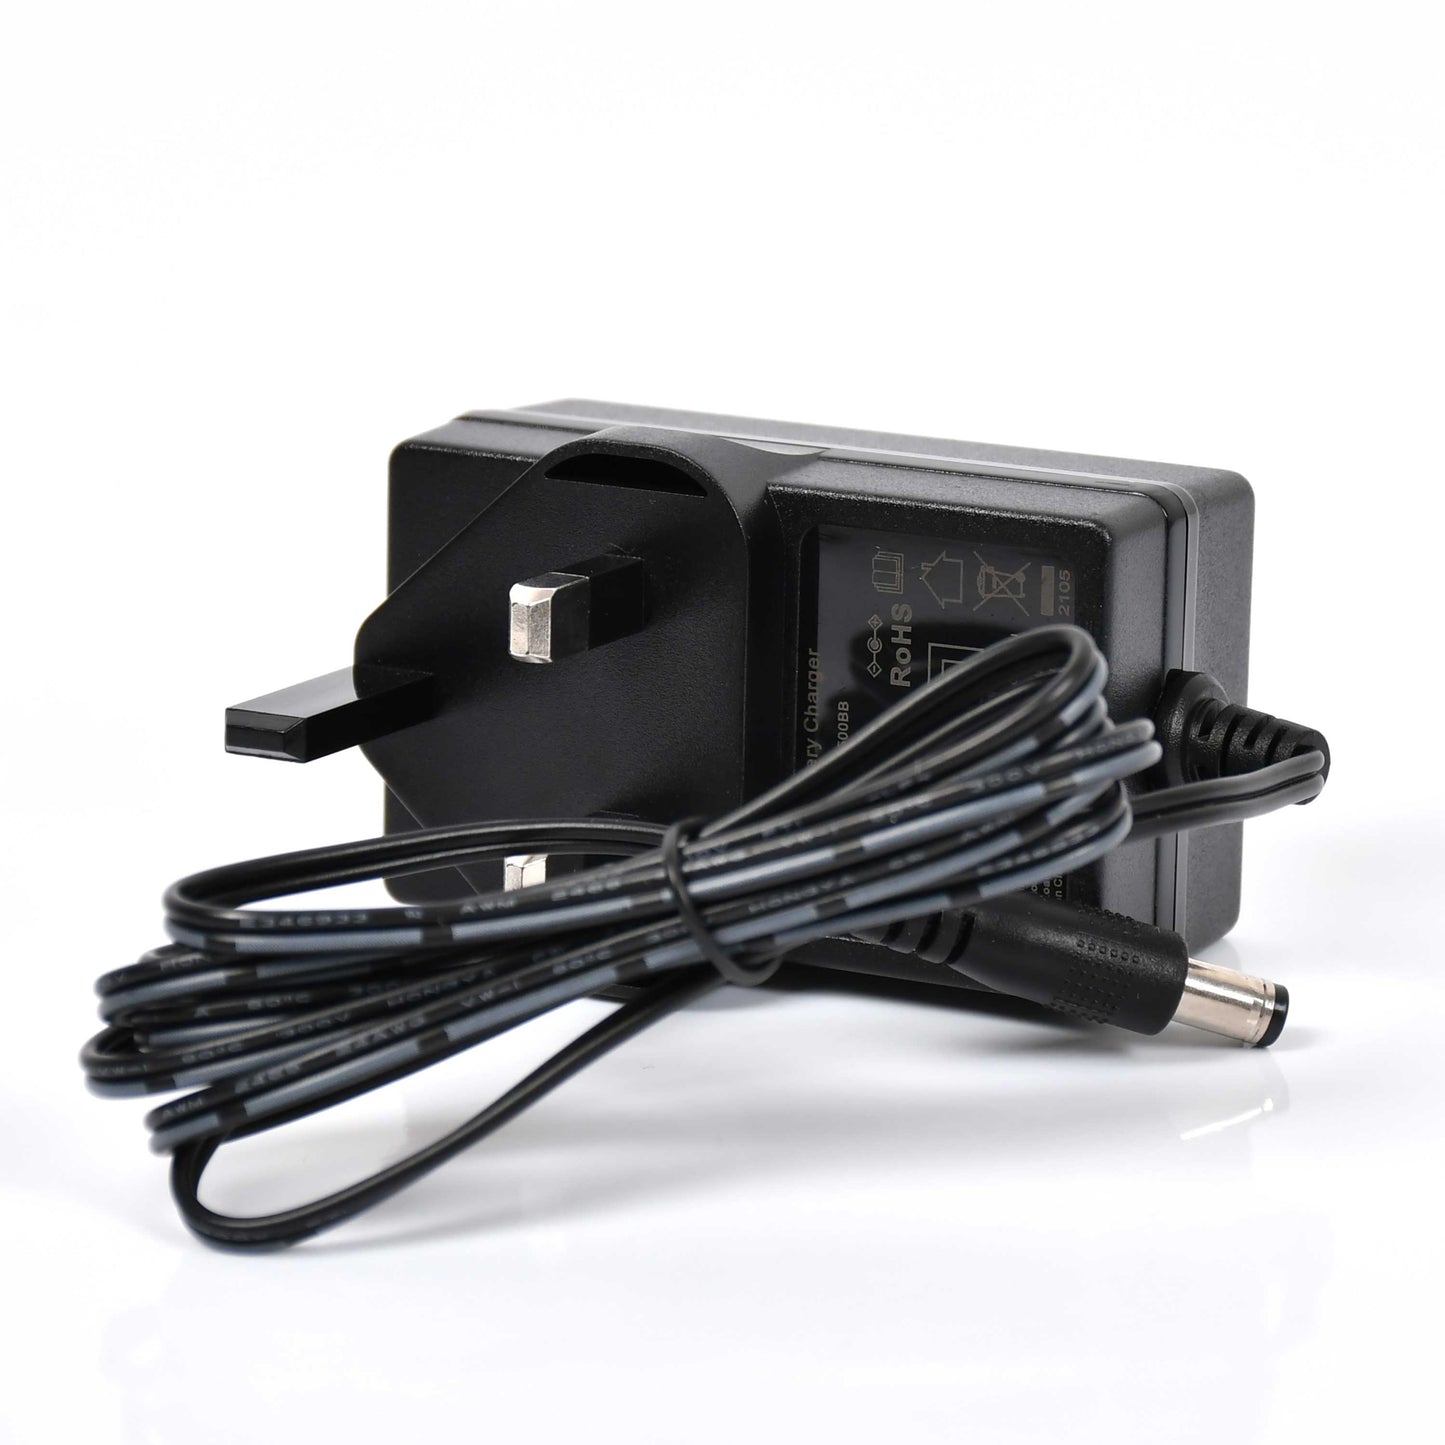 CH25 - Mains charger for multiple Ni-MH battery products – click to see list